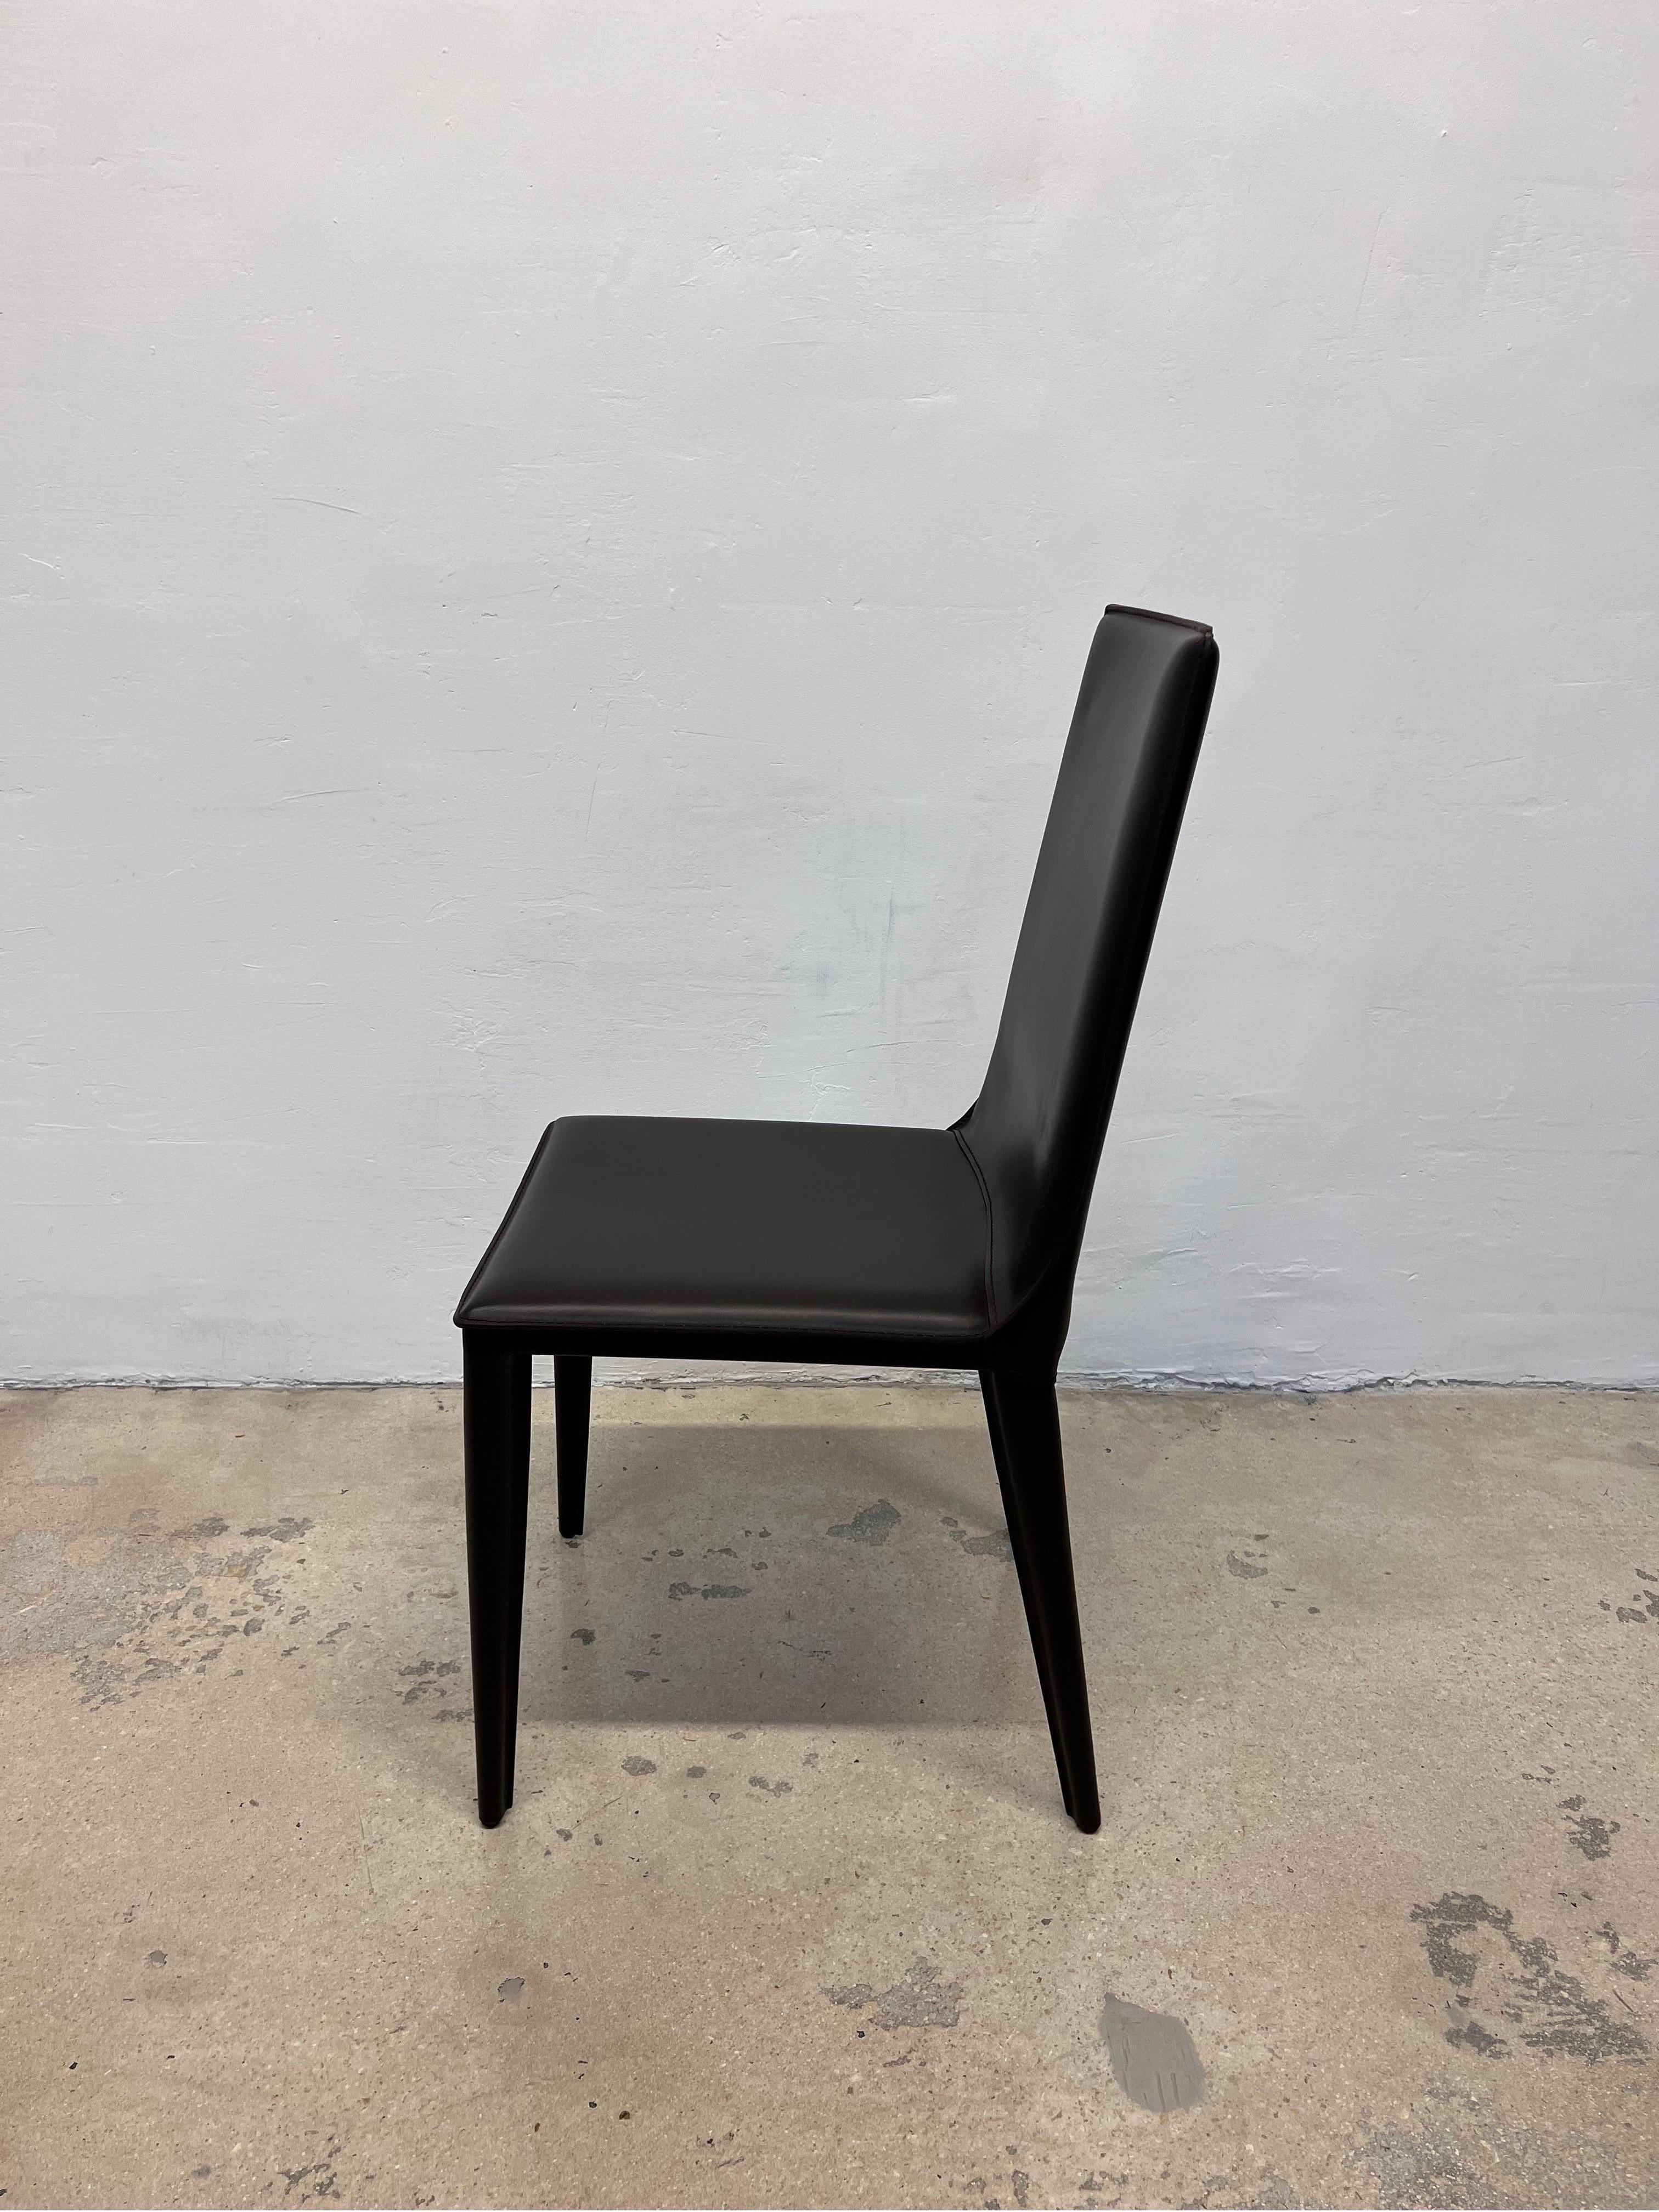 Bottega Leather Dining Chairs by Fauciglietti and Bianchi for DWR, Pair In Good Condition For Sale In Miami, FL